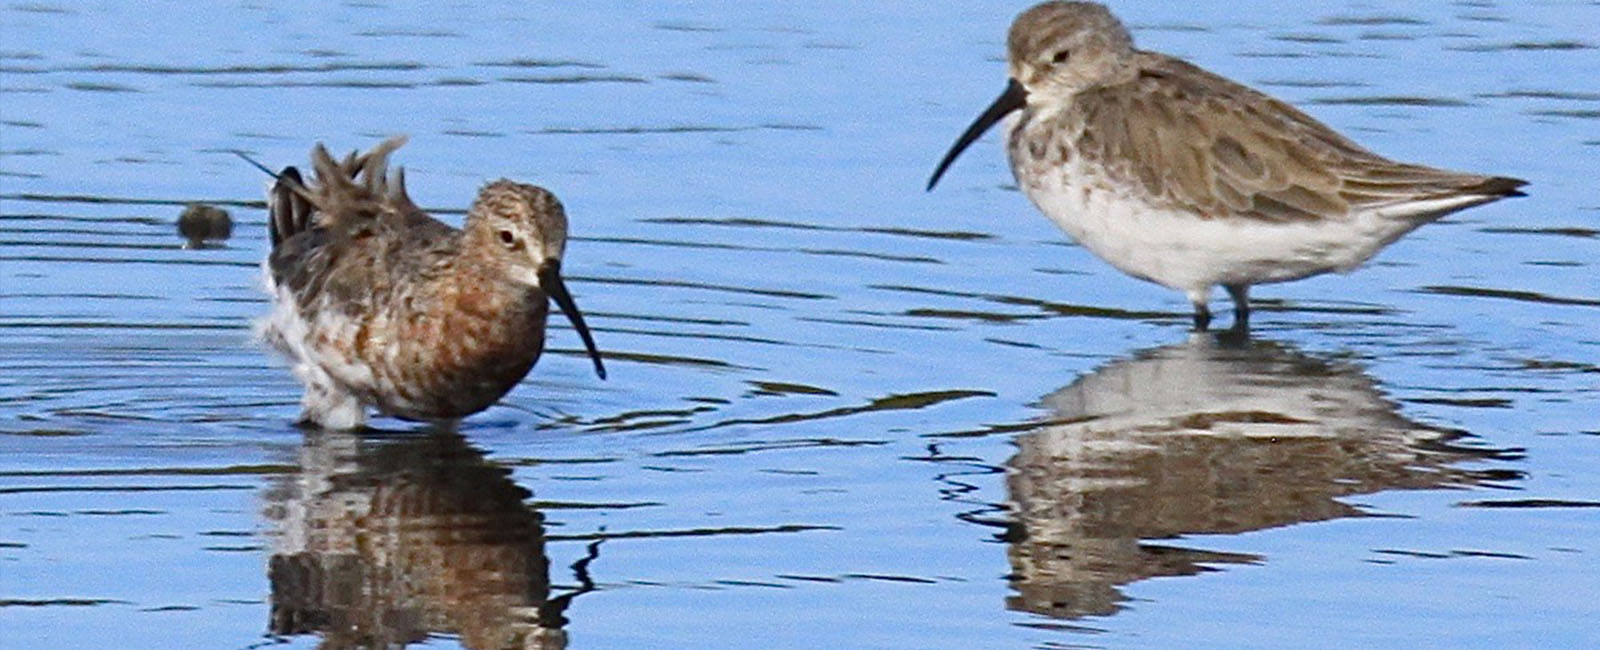 two small birds with long thin beaks in water with their reflections